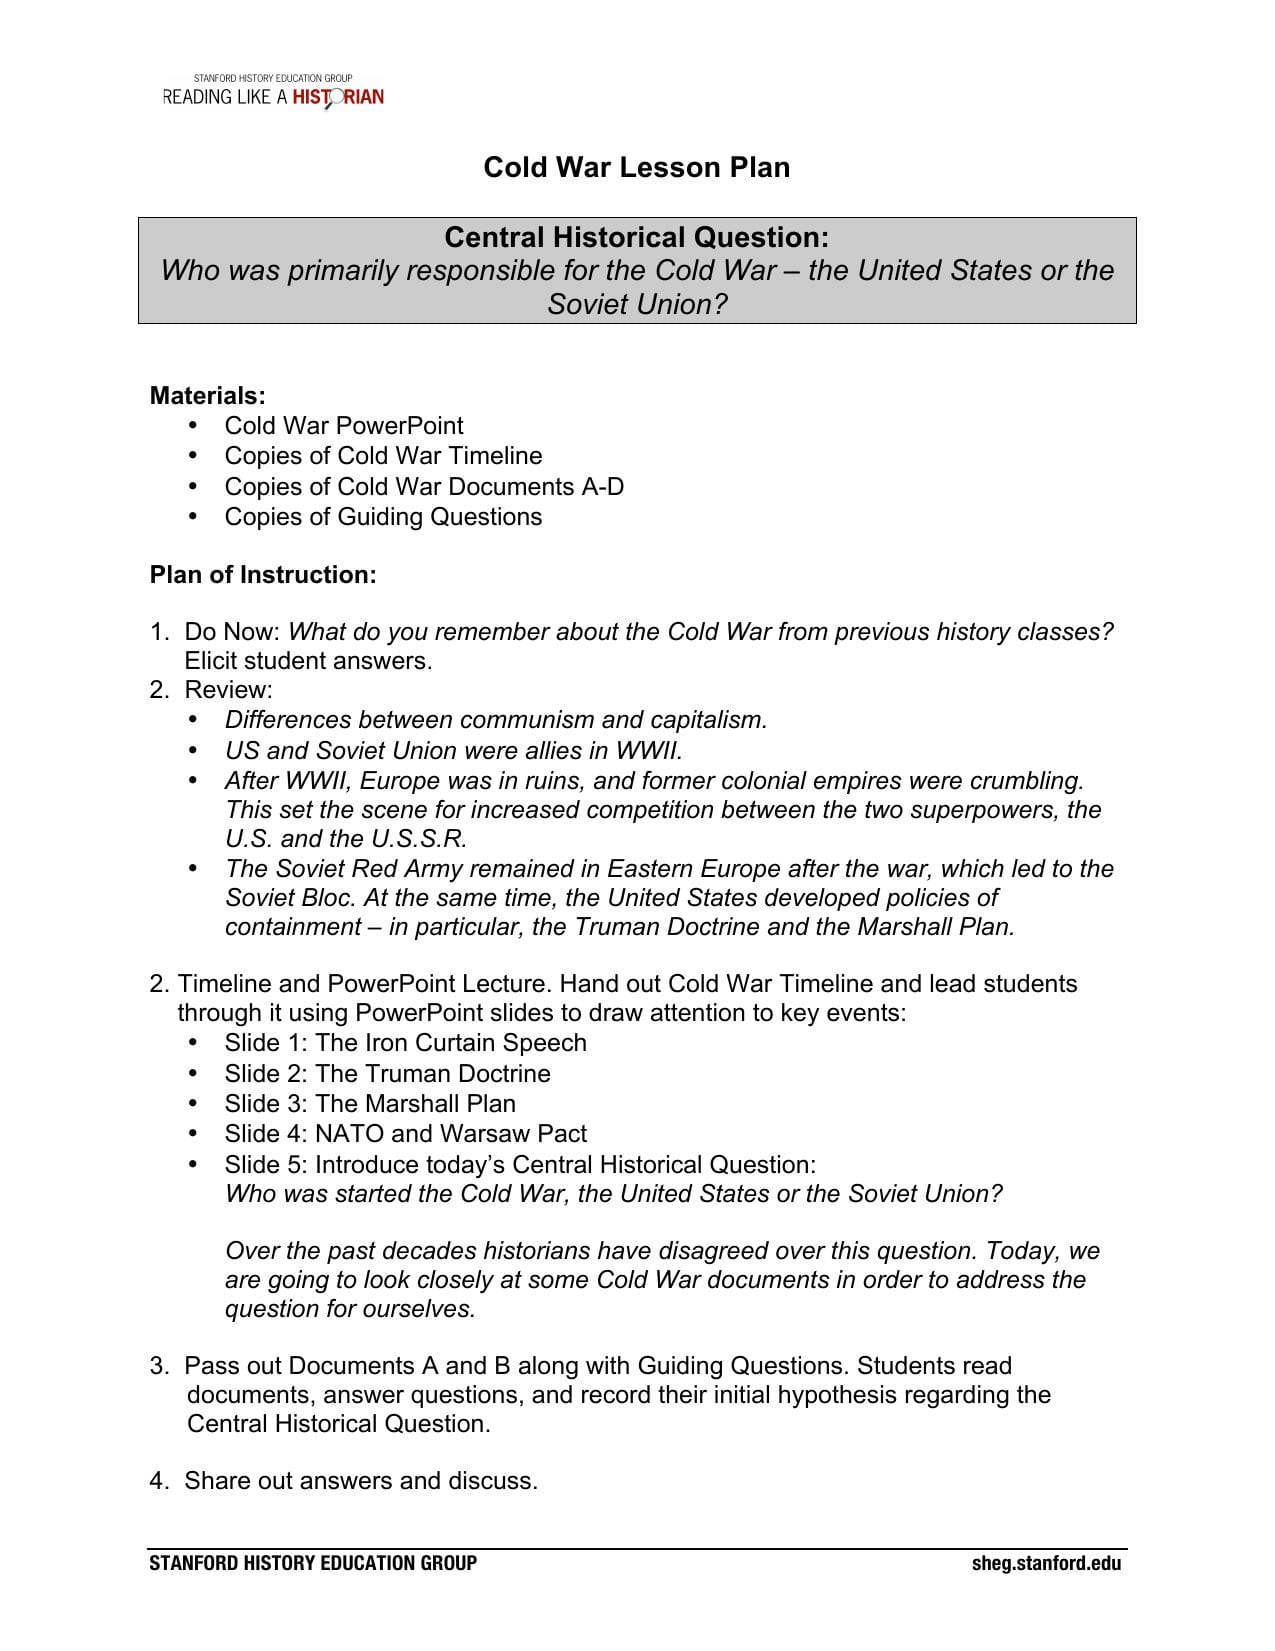 Cold War Lesson Plan  Stanford History Education Group Throughout Stanford History Education Group Reading Like A Historian Worksheet Answers